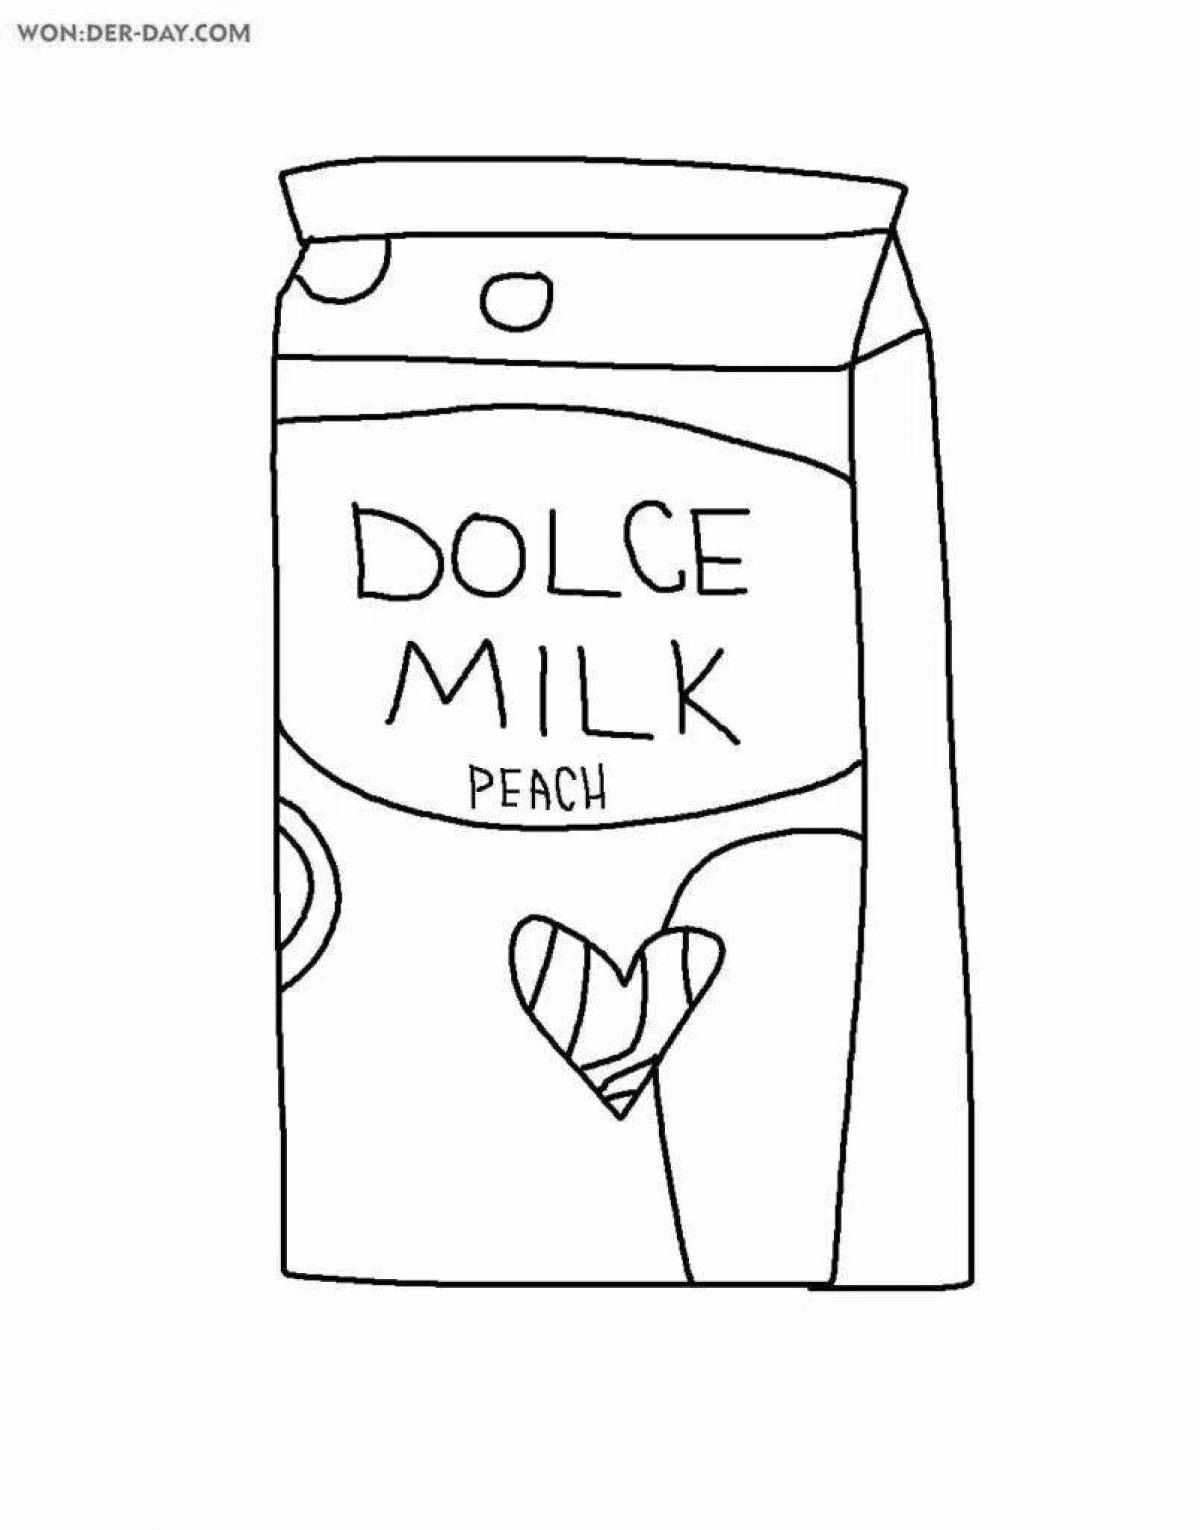 Dolce milk cosmetics for girls #21